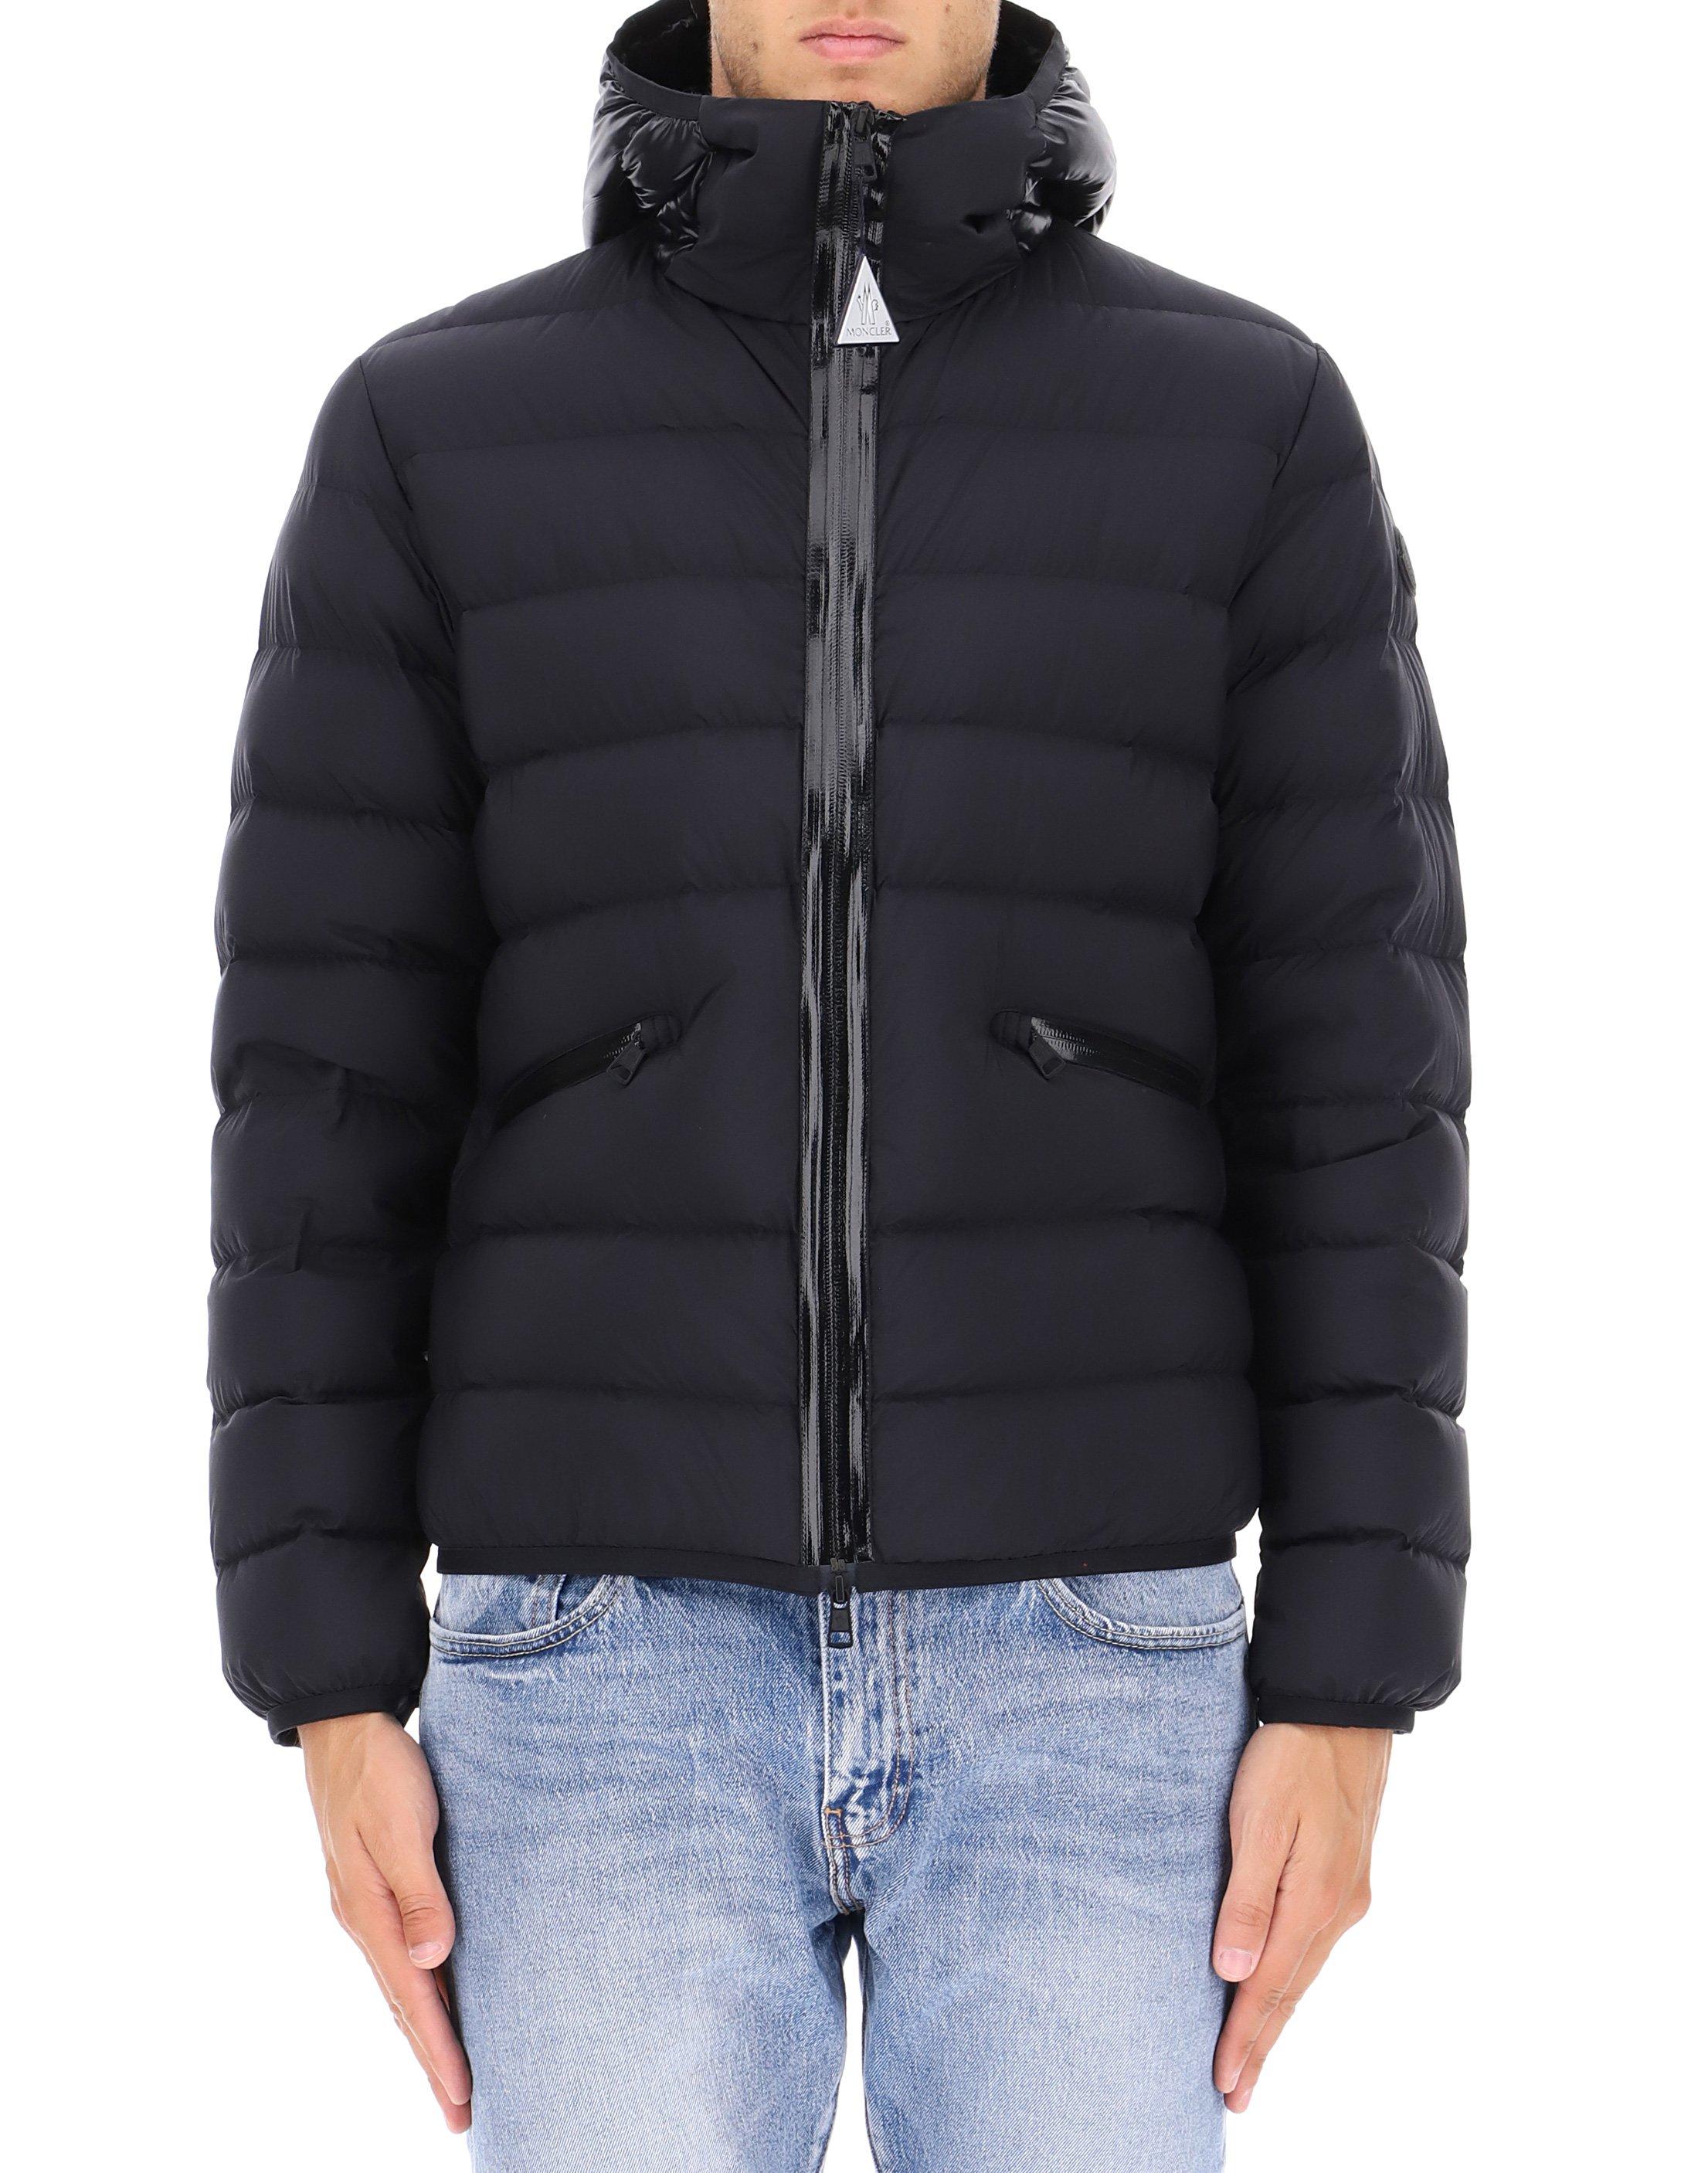 moncler achard jacket Cheaper Than Retail Price> Buy Clothing, Accessories  and lifestyle products for women & men -